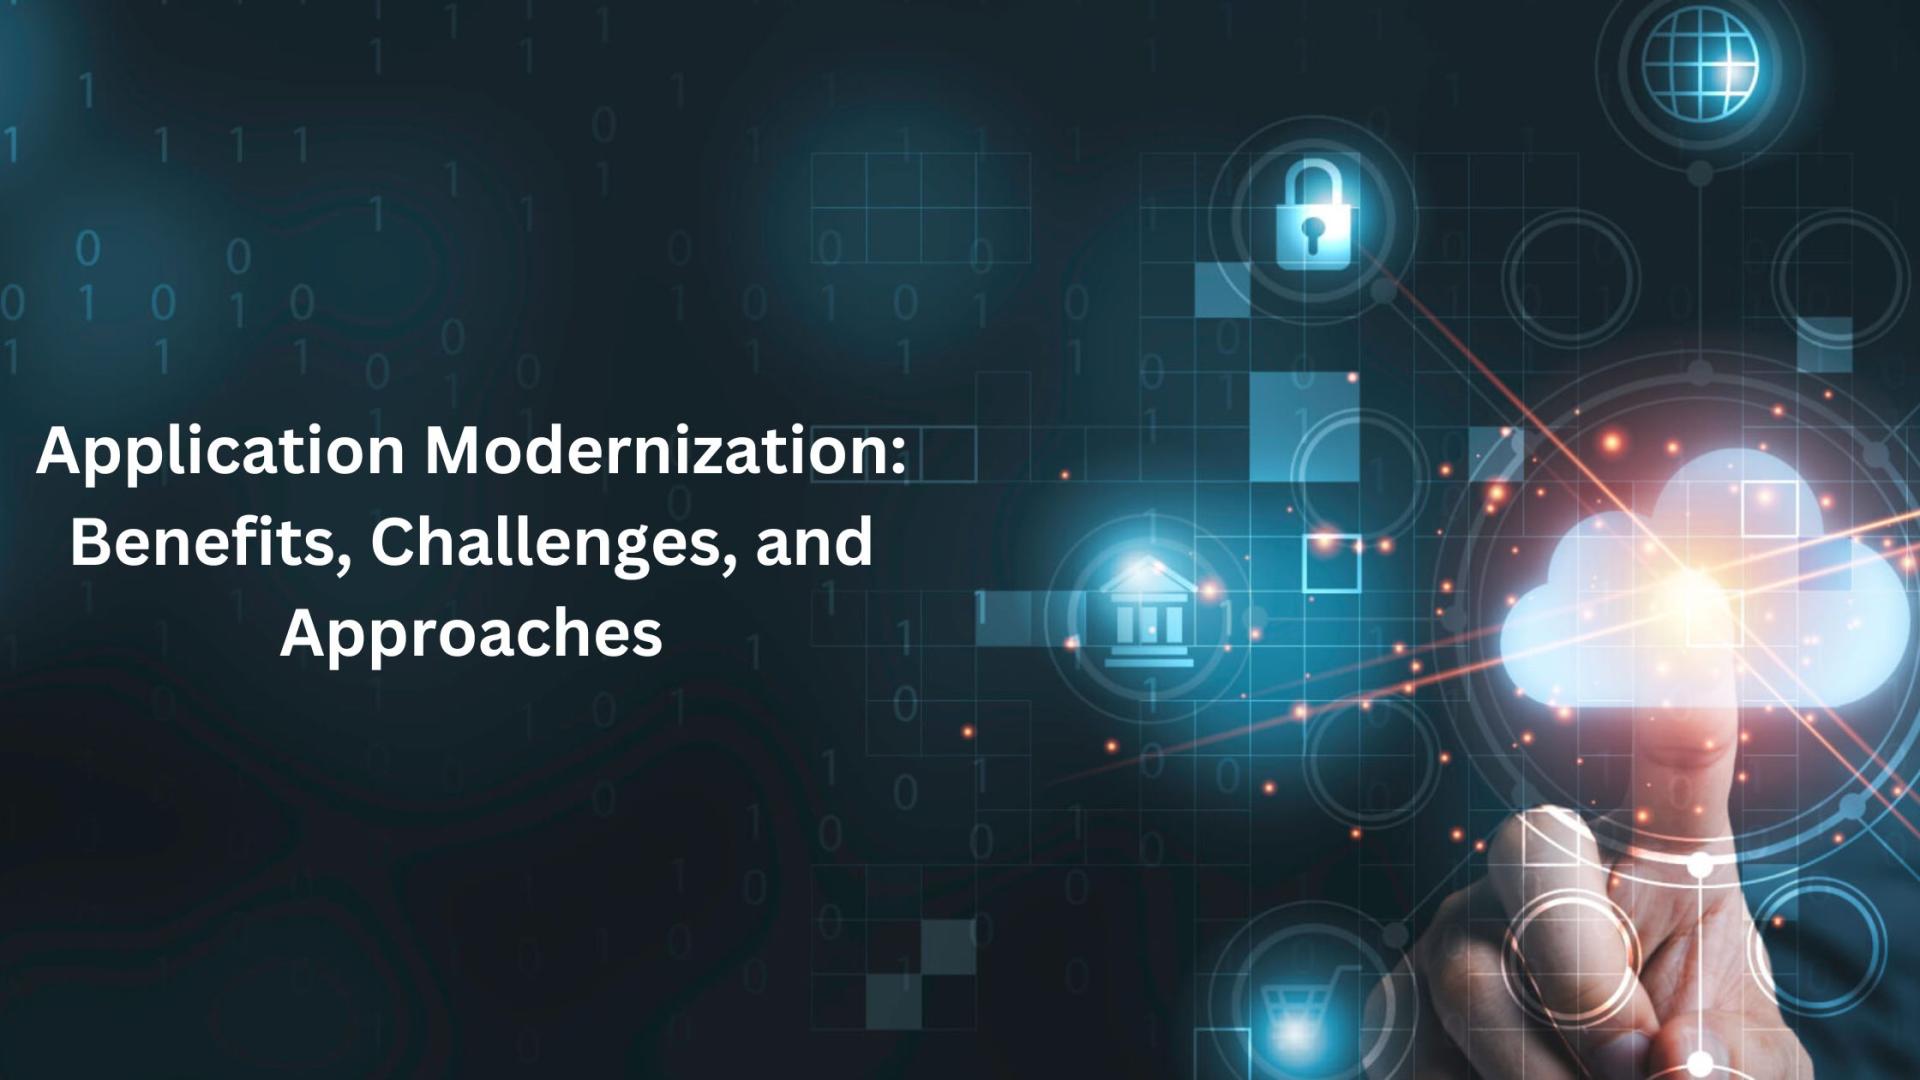 Application Modernization: Benefits, Challenges, and Approaches